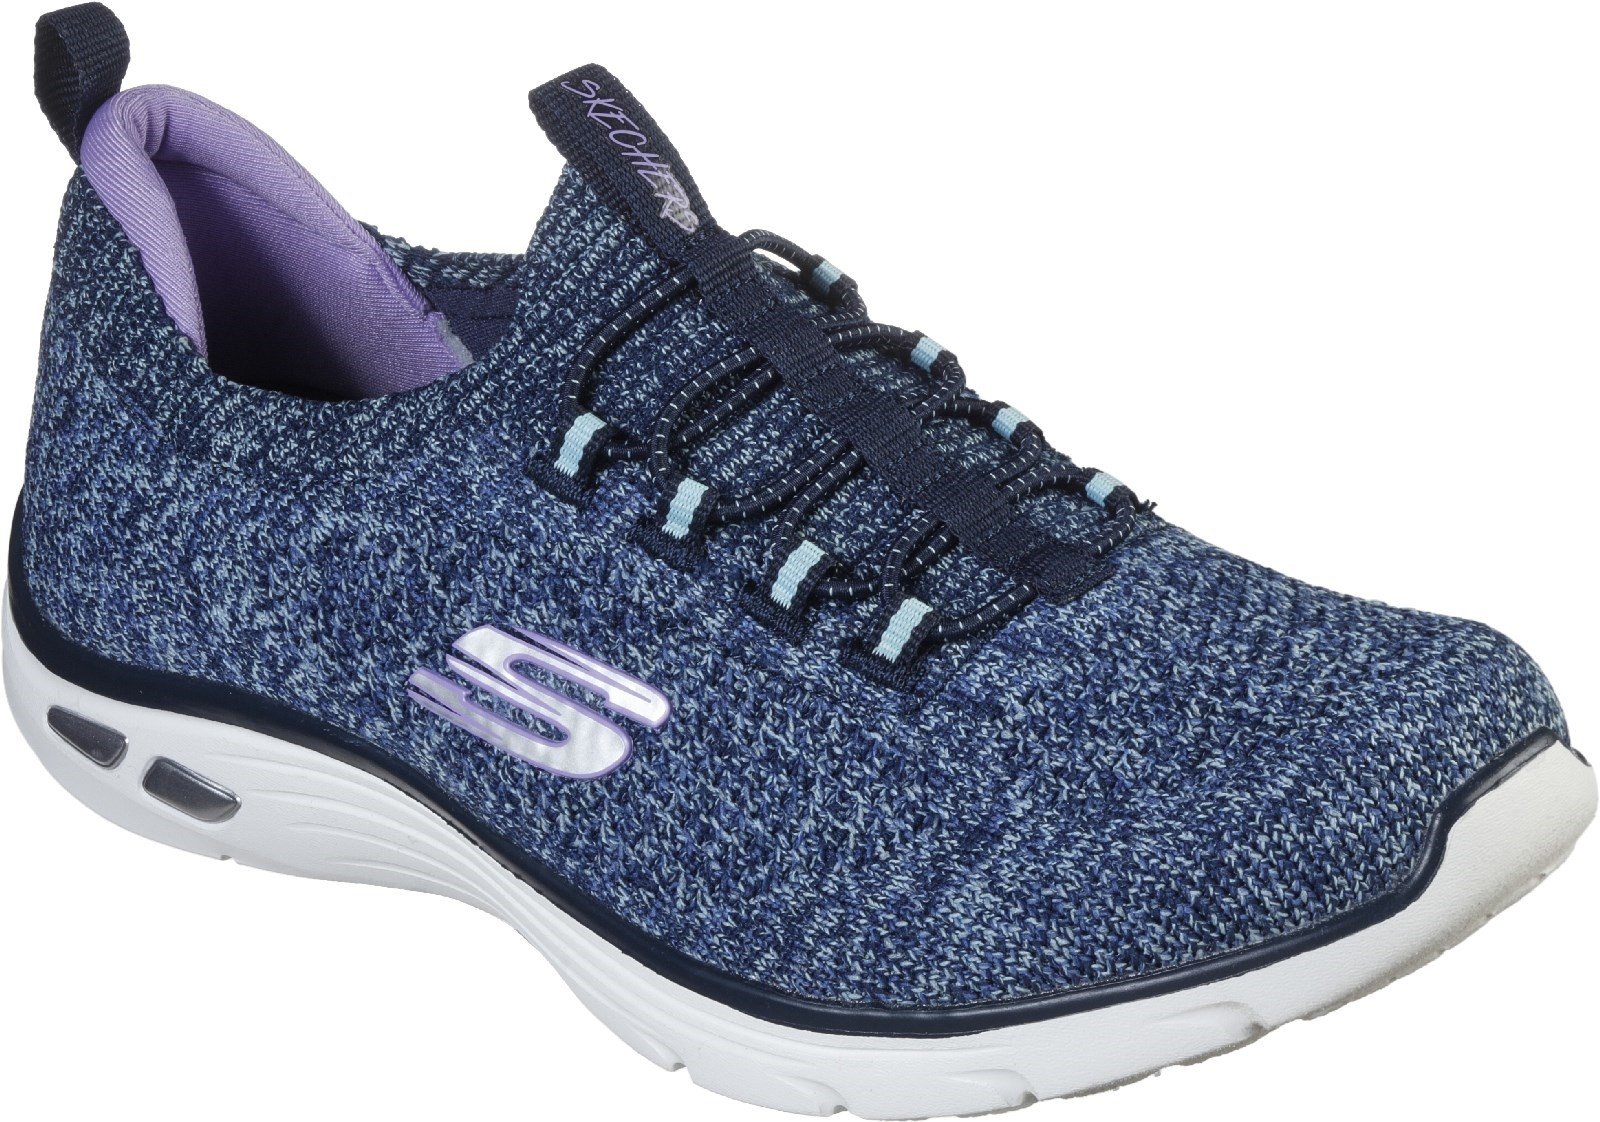 Skechers Women's Relaxed Fit Empire D'Lux Sharp Trainers Various Colours 30300 - Navy/Aqua 7